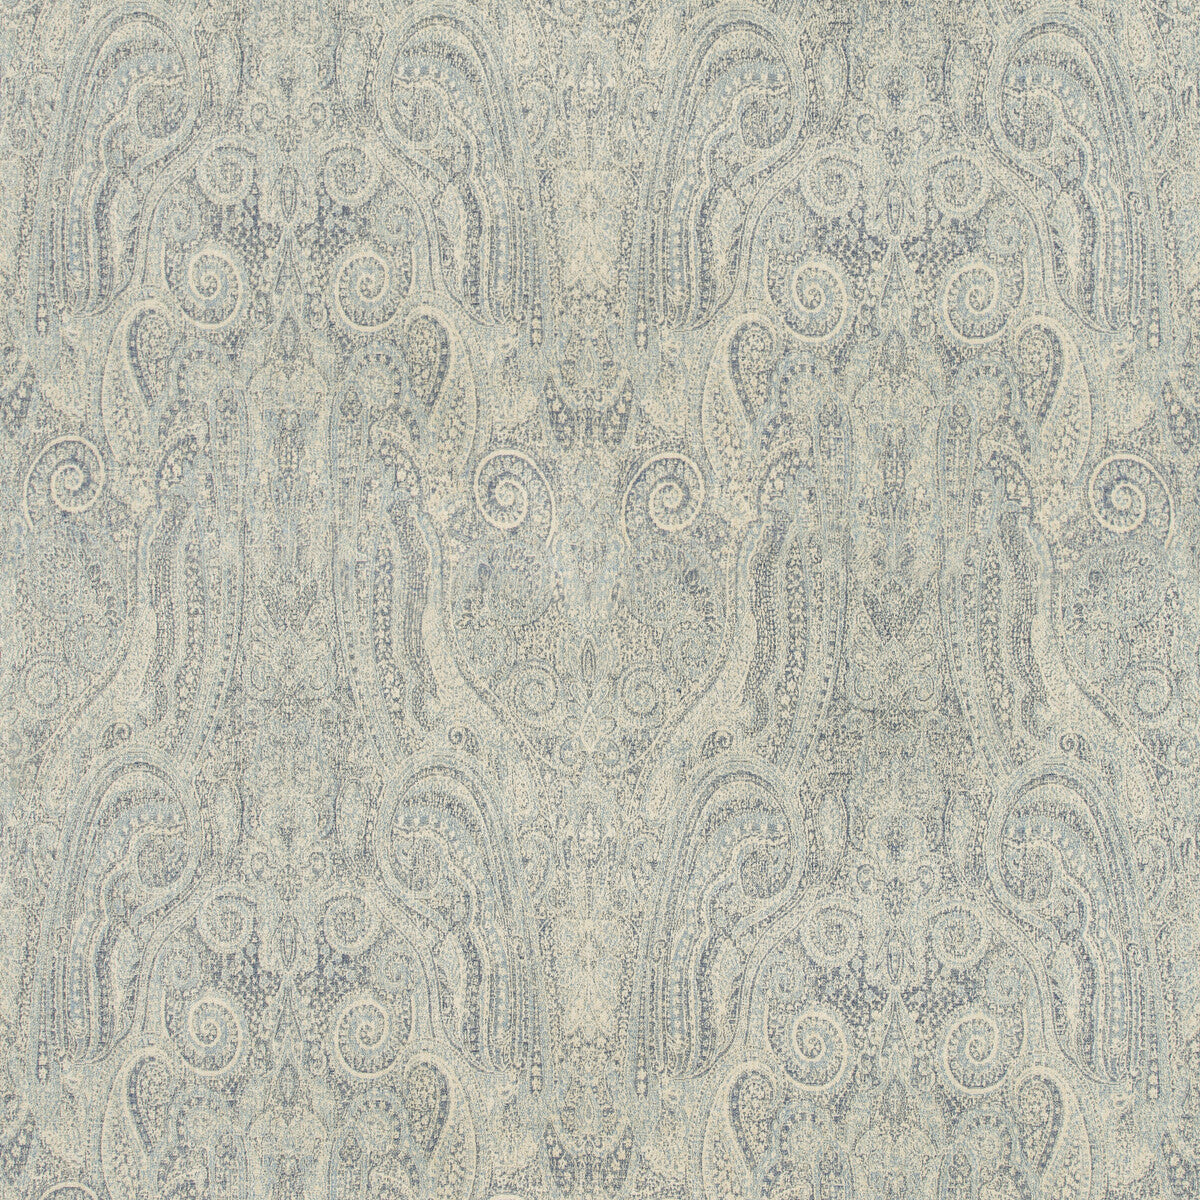 Foxhill Paisley fabric in denim color - pattern 2019112.505.0 - by Lee Jofa in the Manor House collection